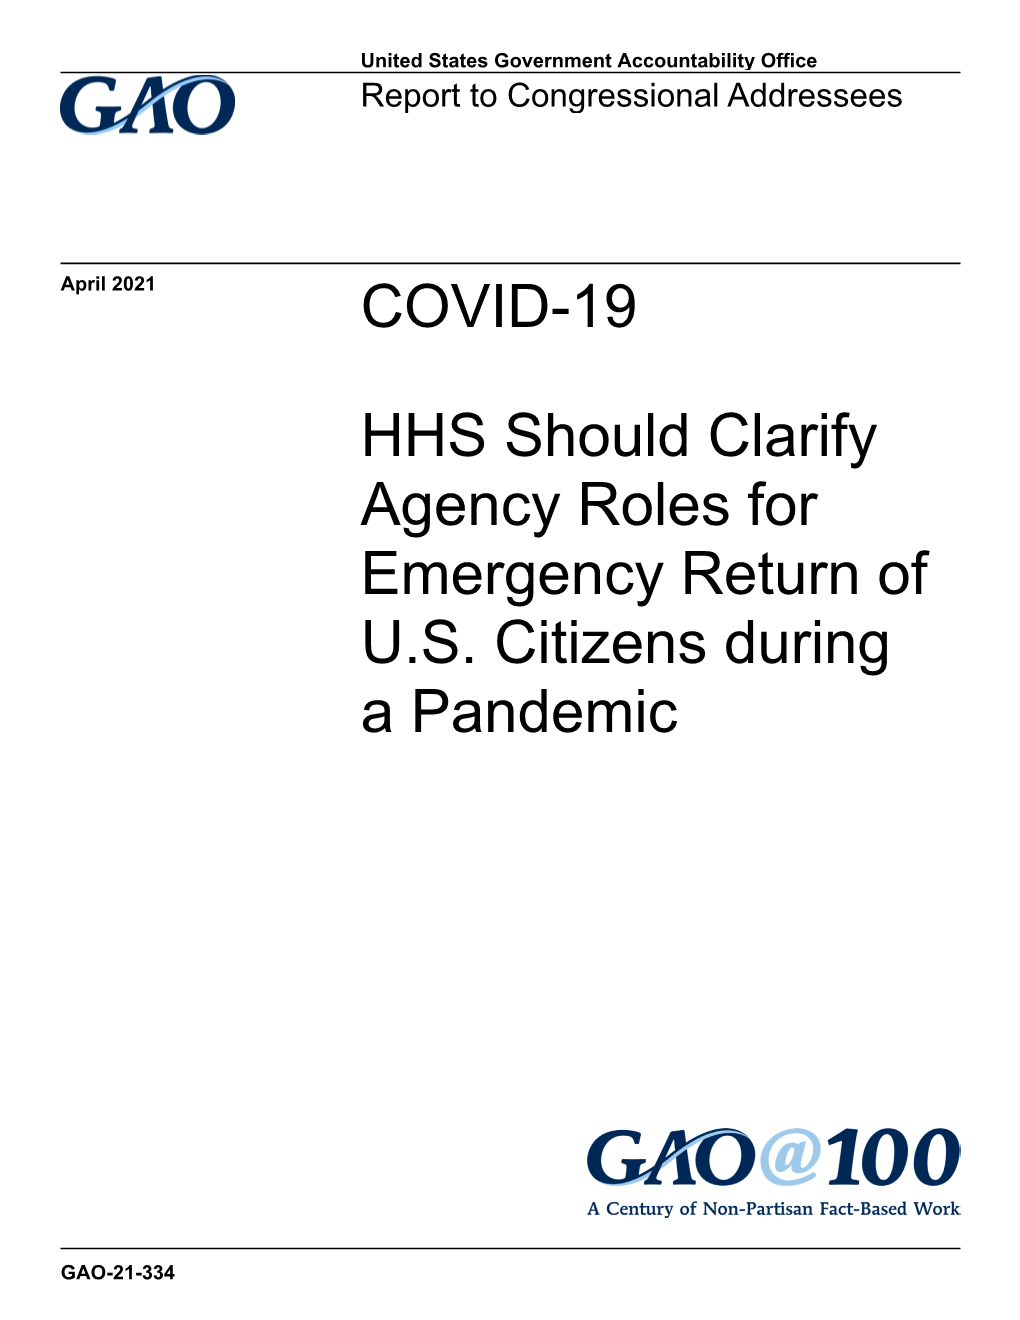 GAO-21-334, COVID-19: HHS Should Clarify Agency Roles For